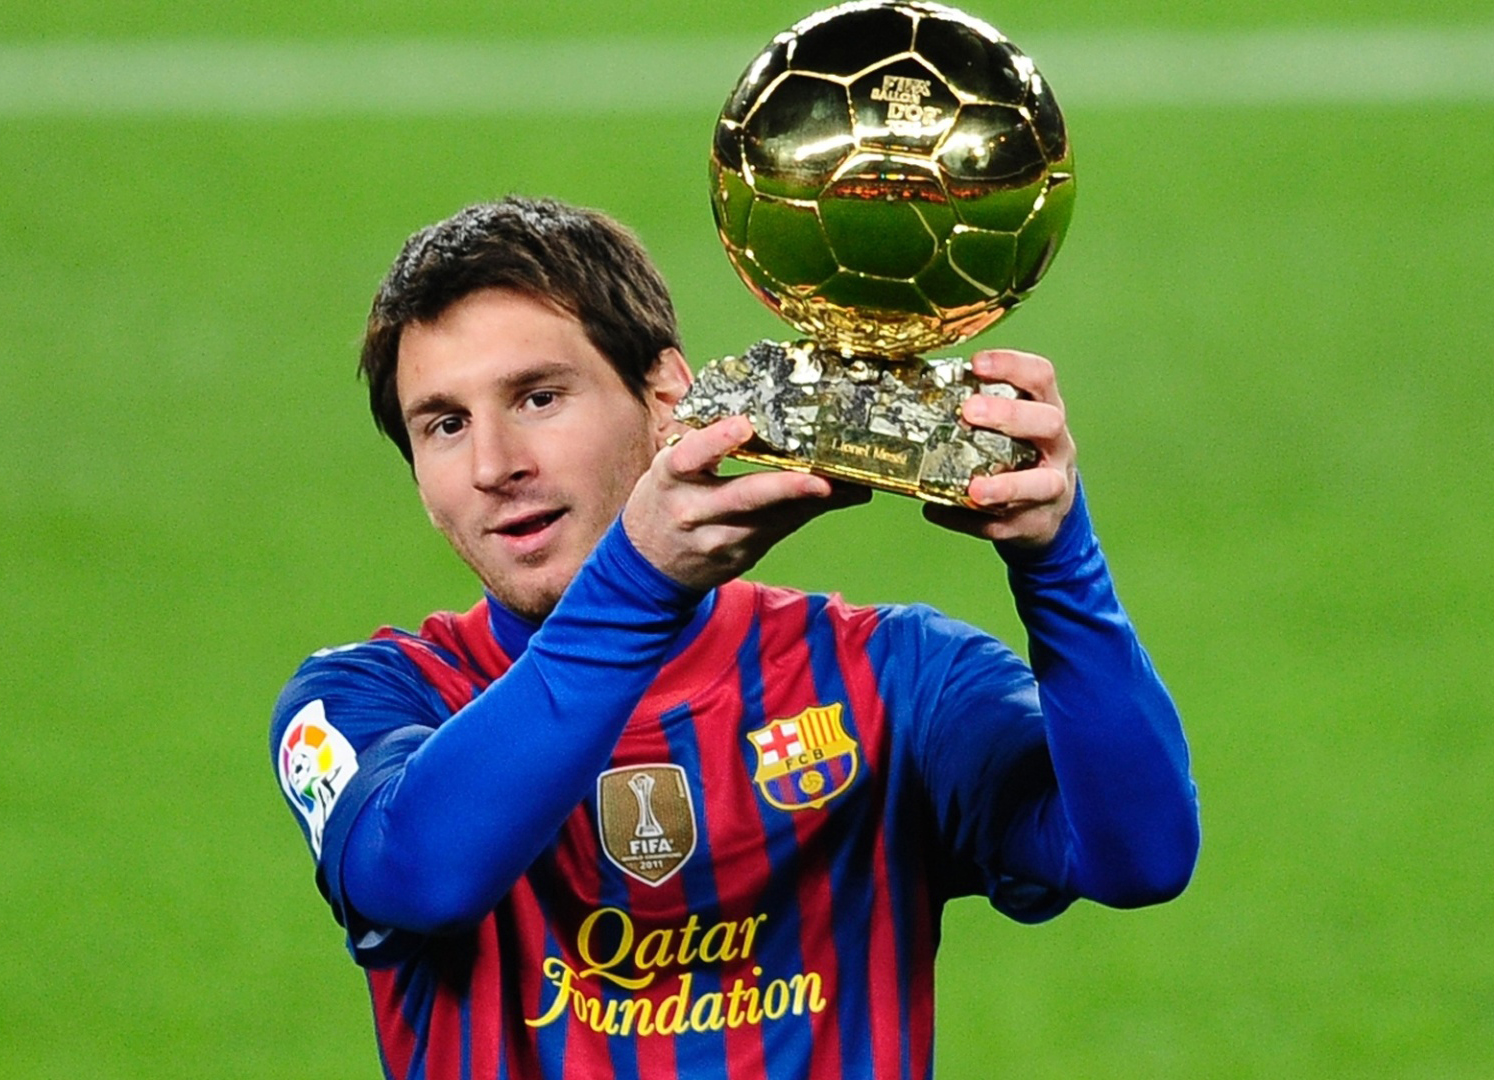 Lionel Messi Football Player Latest Hd Wallpapers 2013 1494x1080